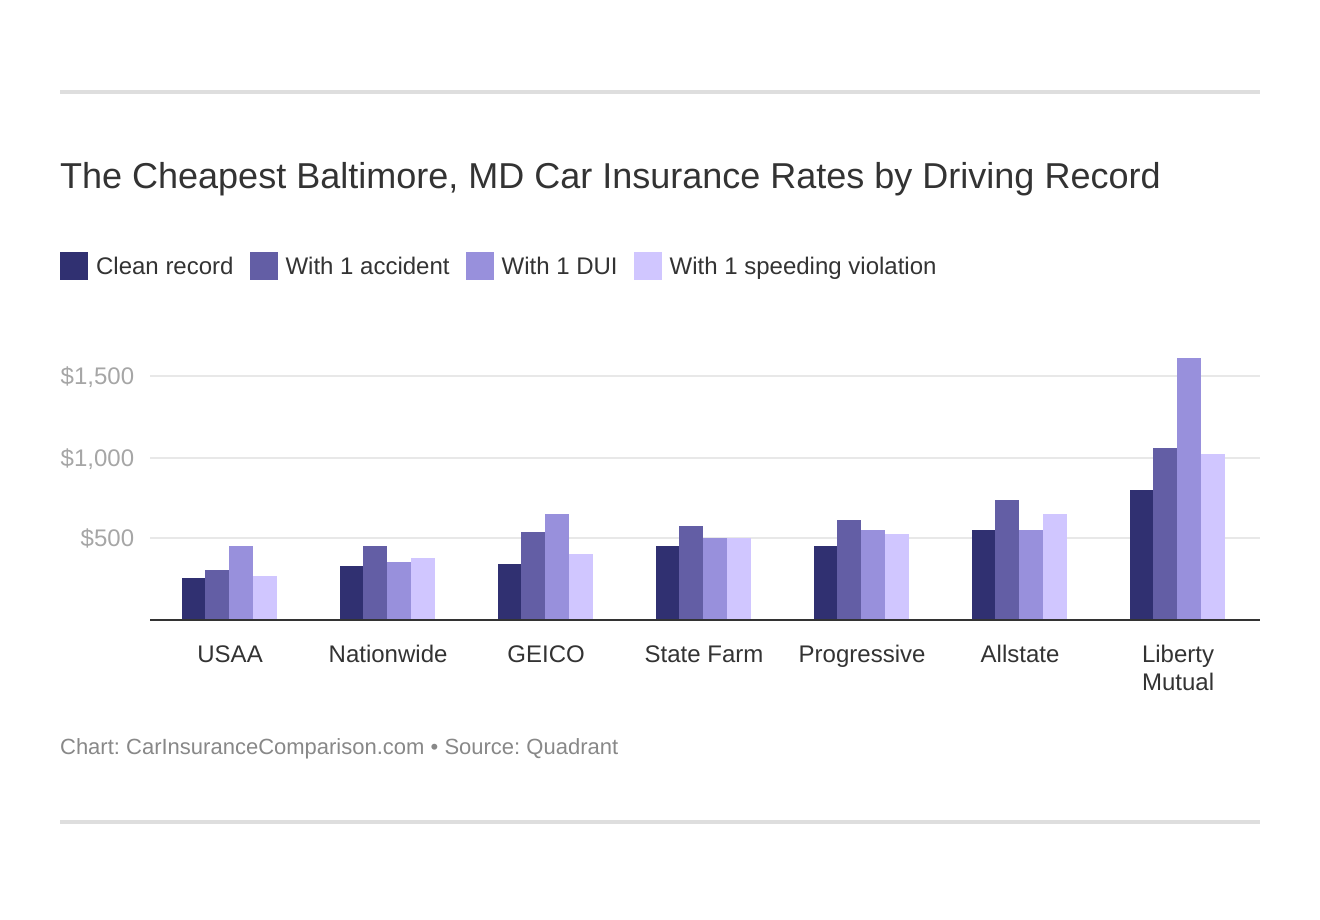 The Cheapest Baltimore, MD Car Insurance Rates by Driving Record